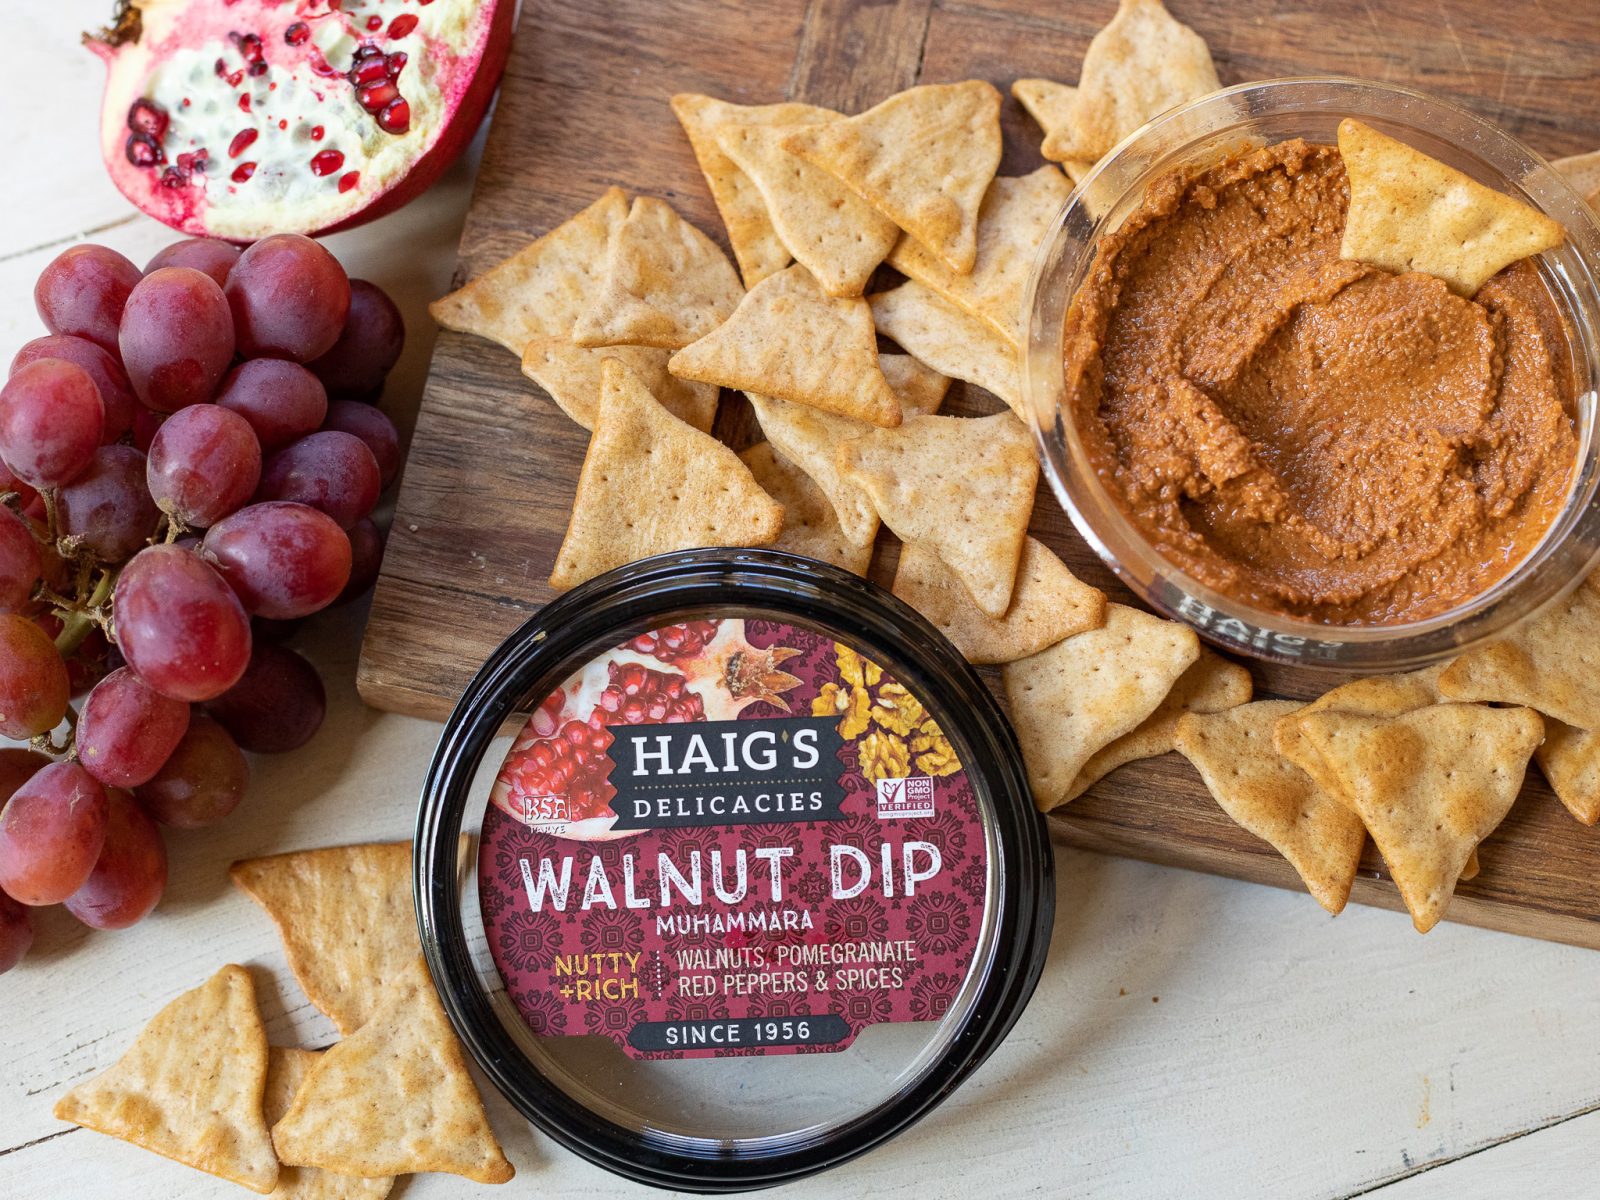 Haig’s Delicacies Walnut Dip Or Baba Ghannaouge As Low As $1.99 At Publix